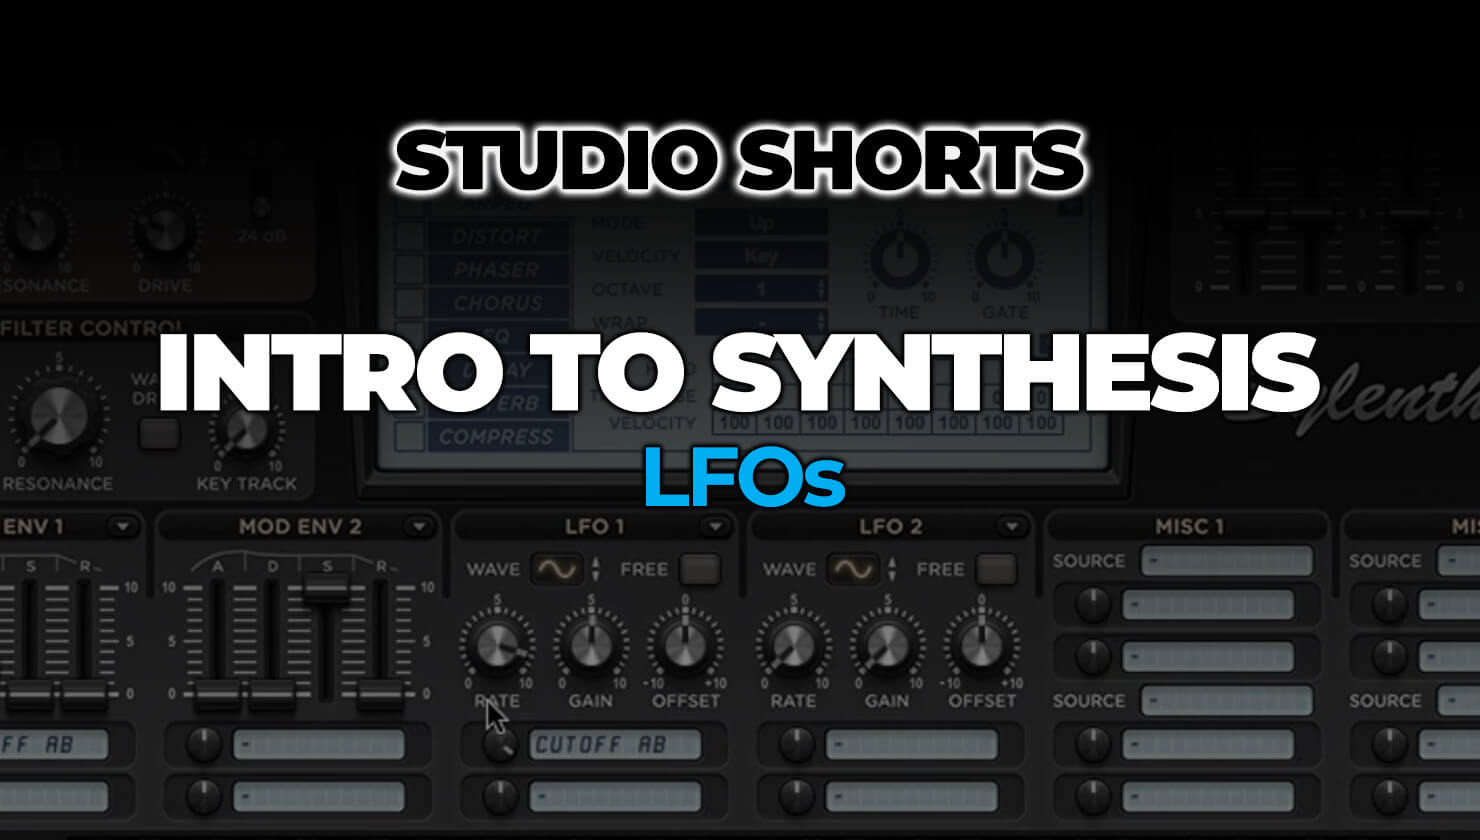 Intro to synthesis: LFOs